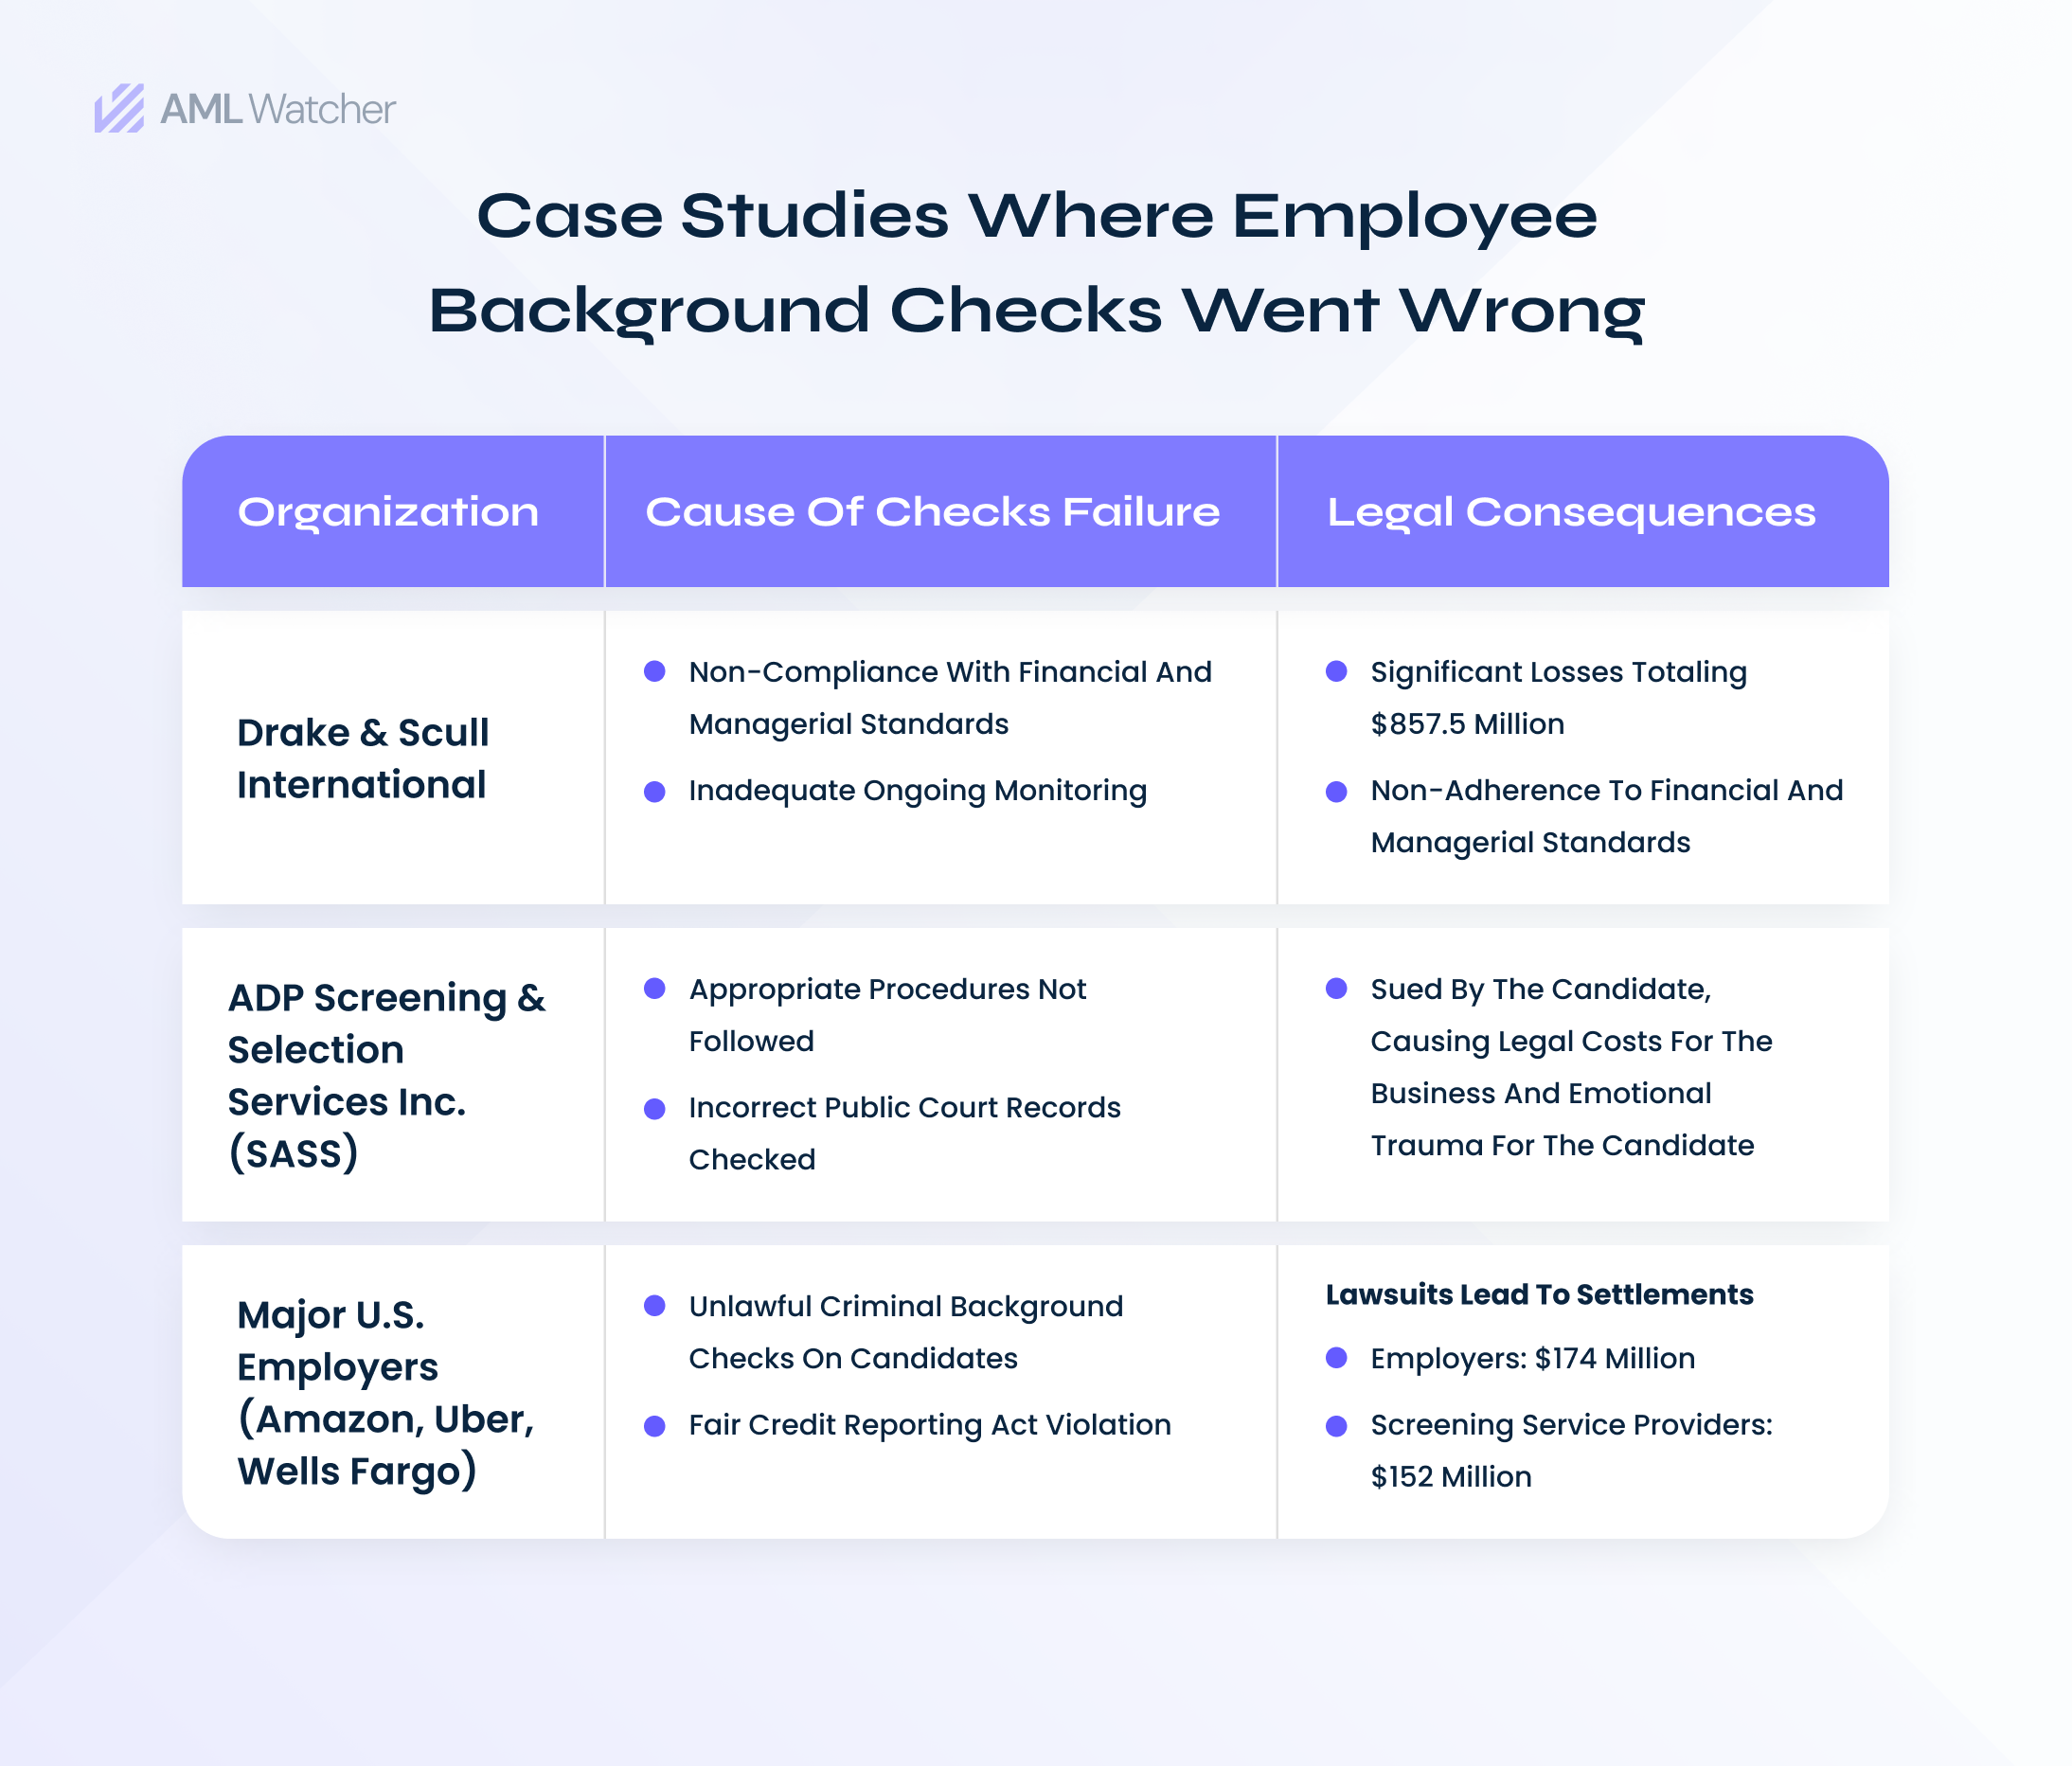 The featured image explains the case studies of organizations where employee background checks failed to follow the standard rules and procedures.